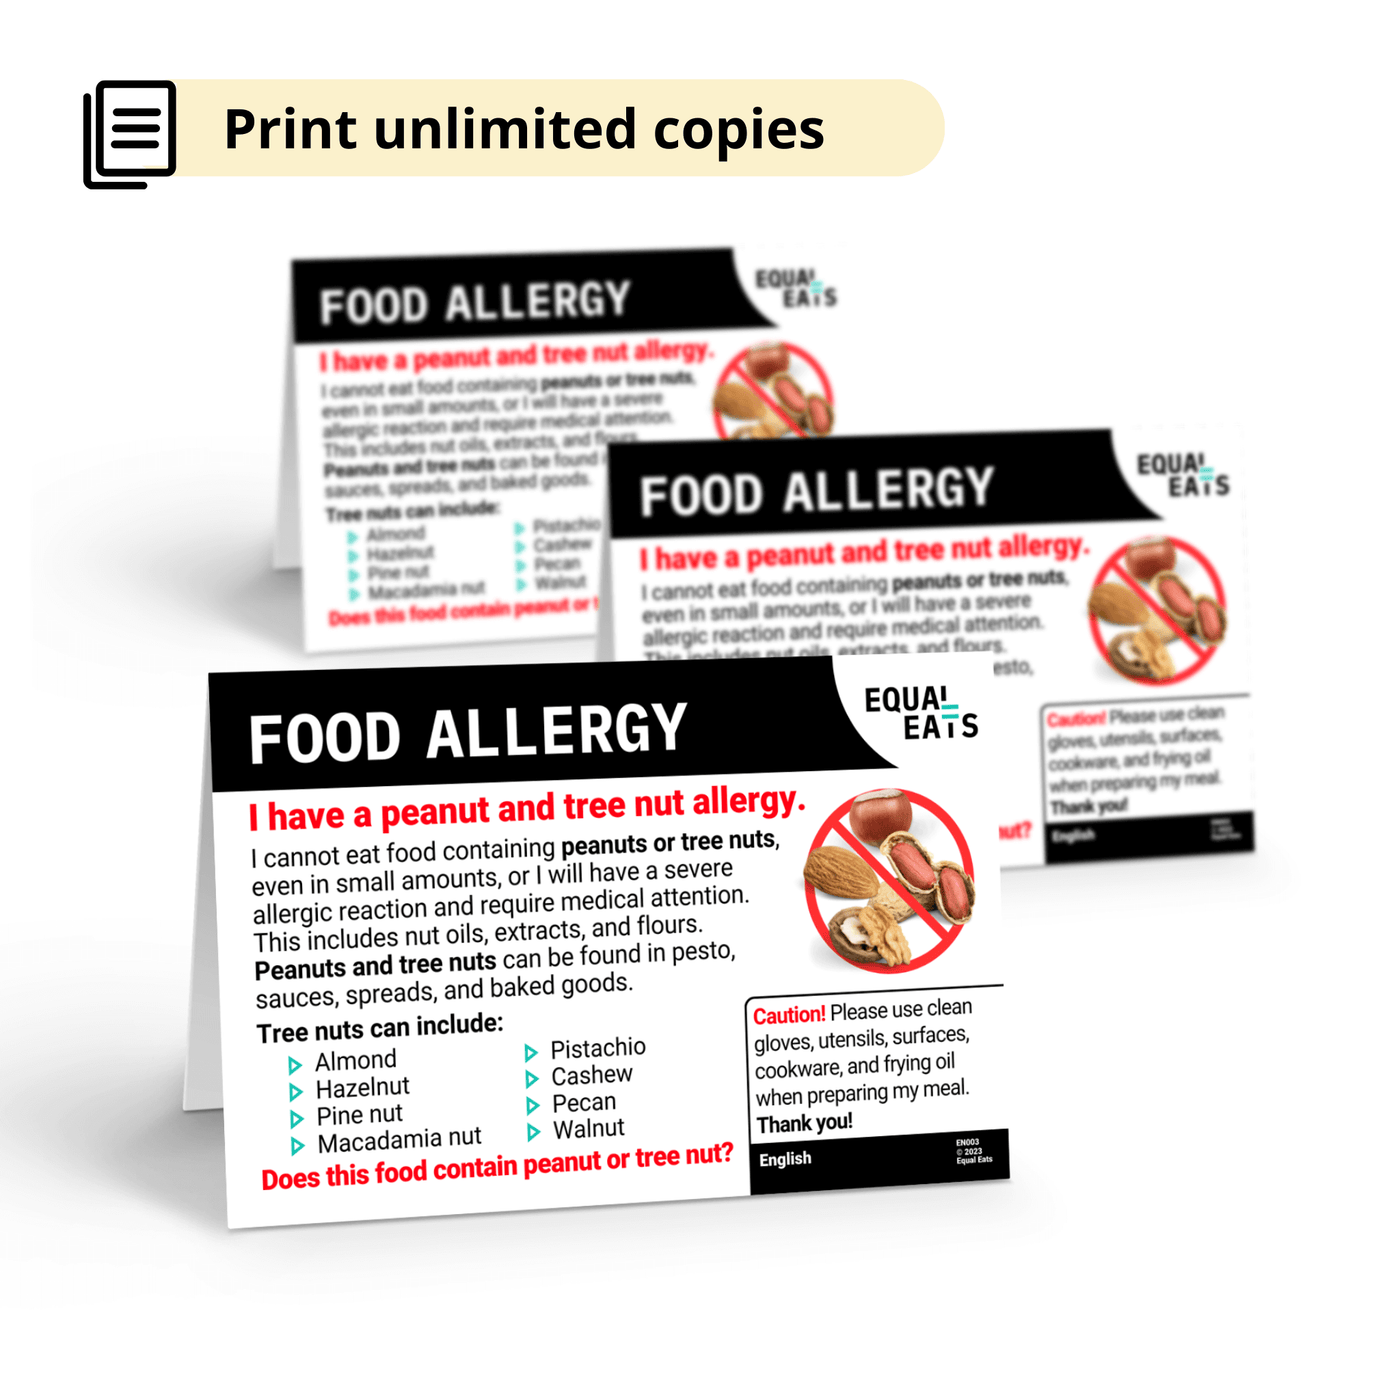 Printable Peanut and Tree Nut Allergy Card in Serbian